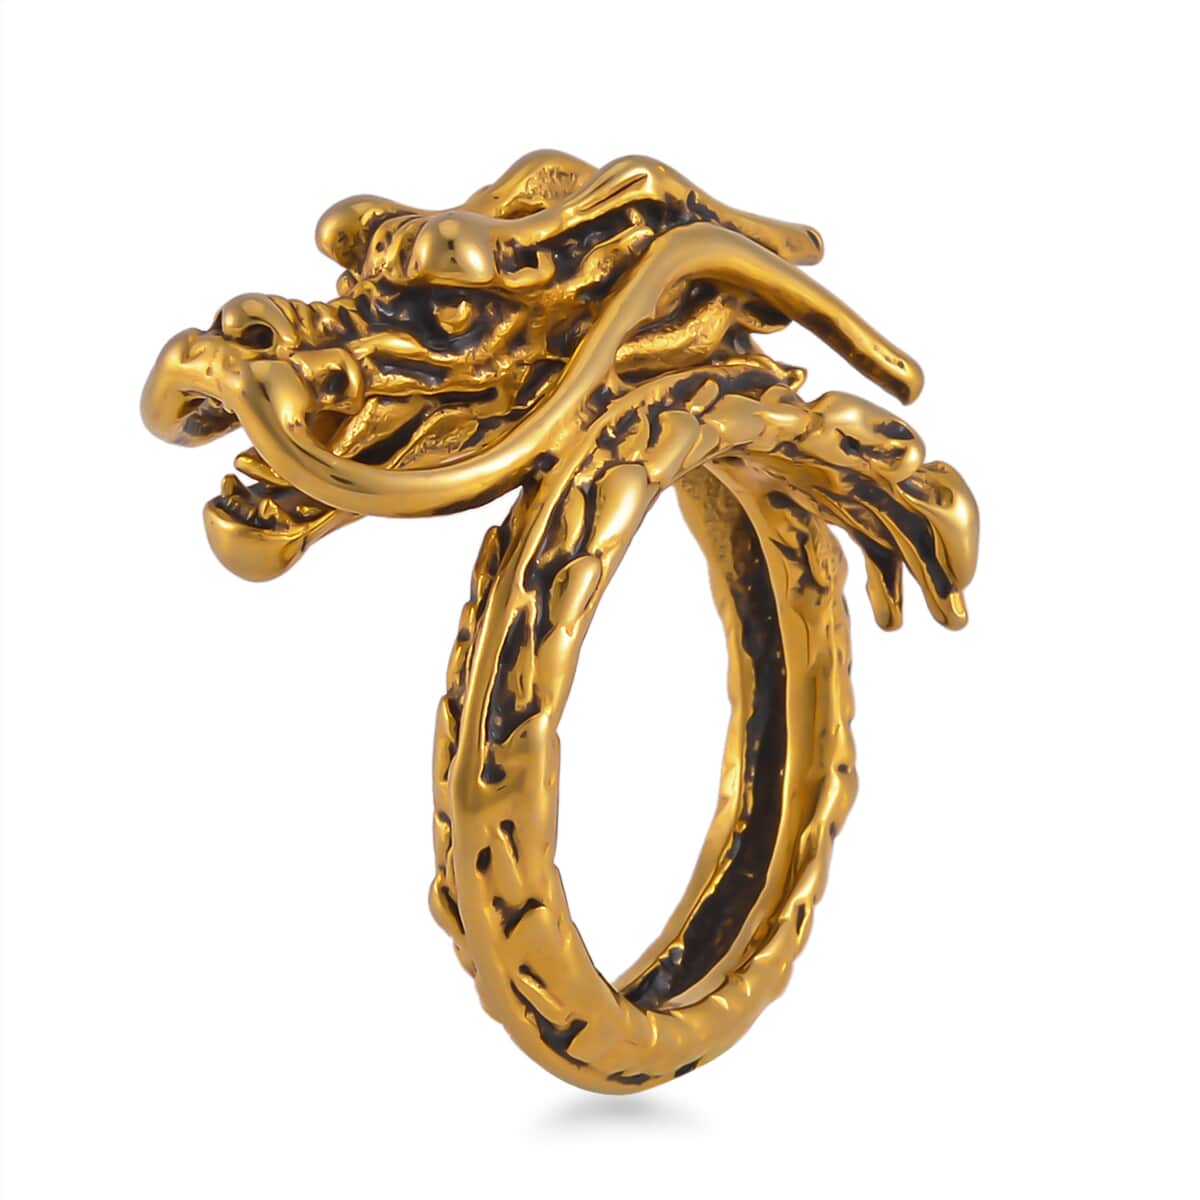 Dragon Men's Ring in ION Plated YG Stainless Steel (Size 10.0) image number 3